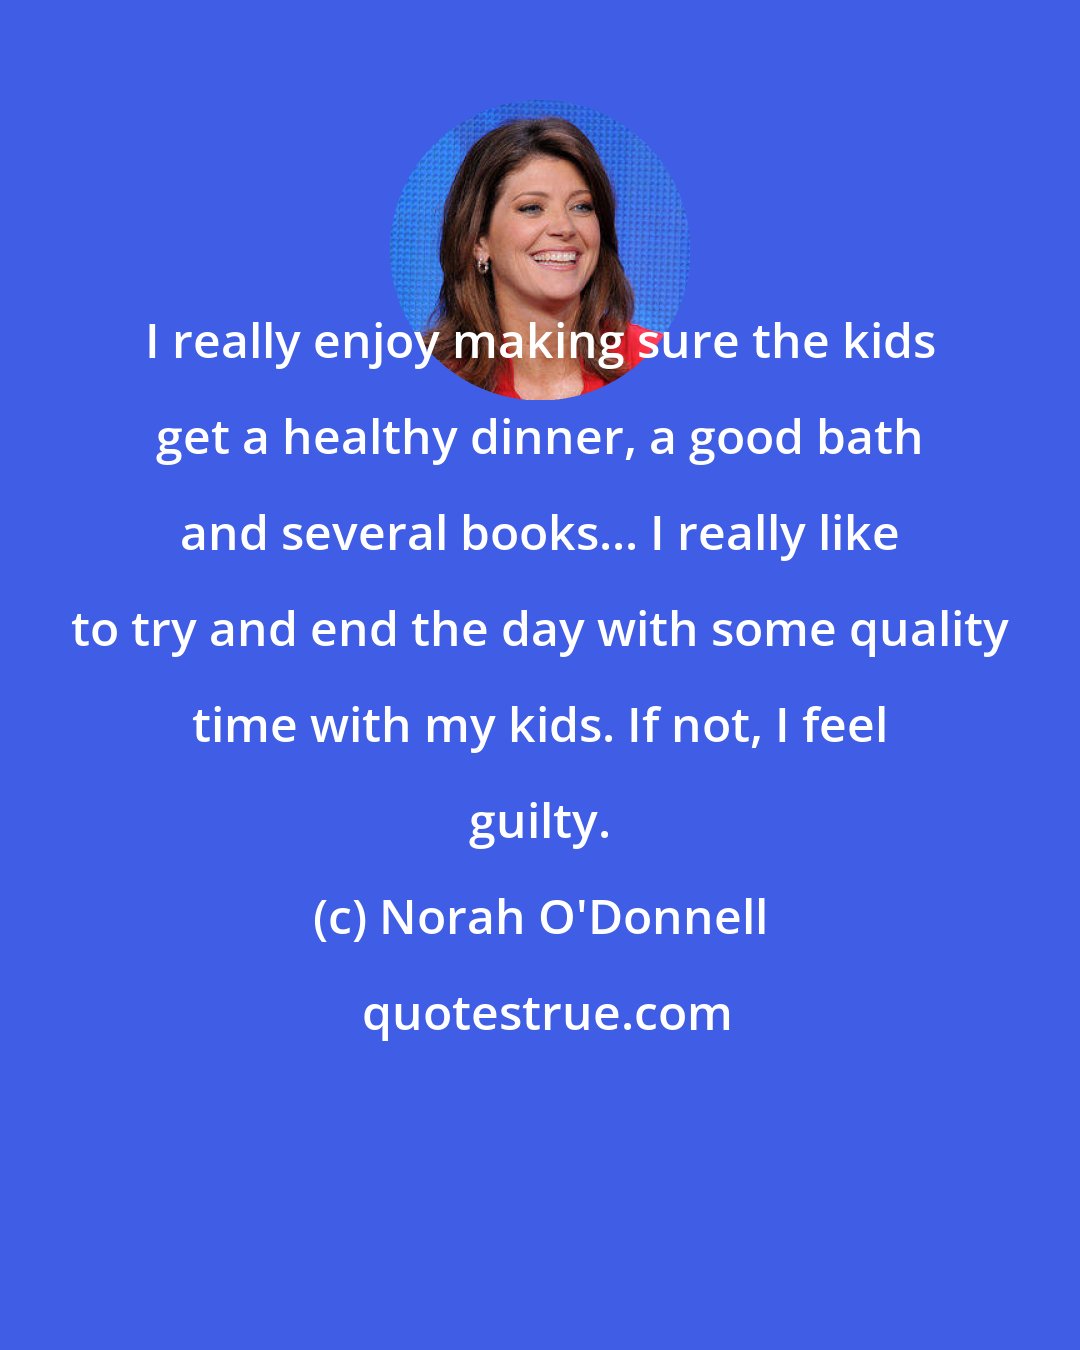 Norah O'Donnell: I really enjoy making sure the kids get a healthy dinner, a good bath and several books... I really like to try and end the day with some quality time with my kids. If not, I feel guilty.